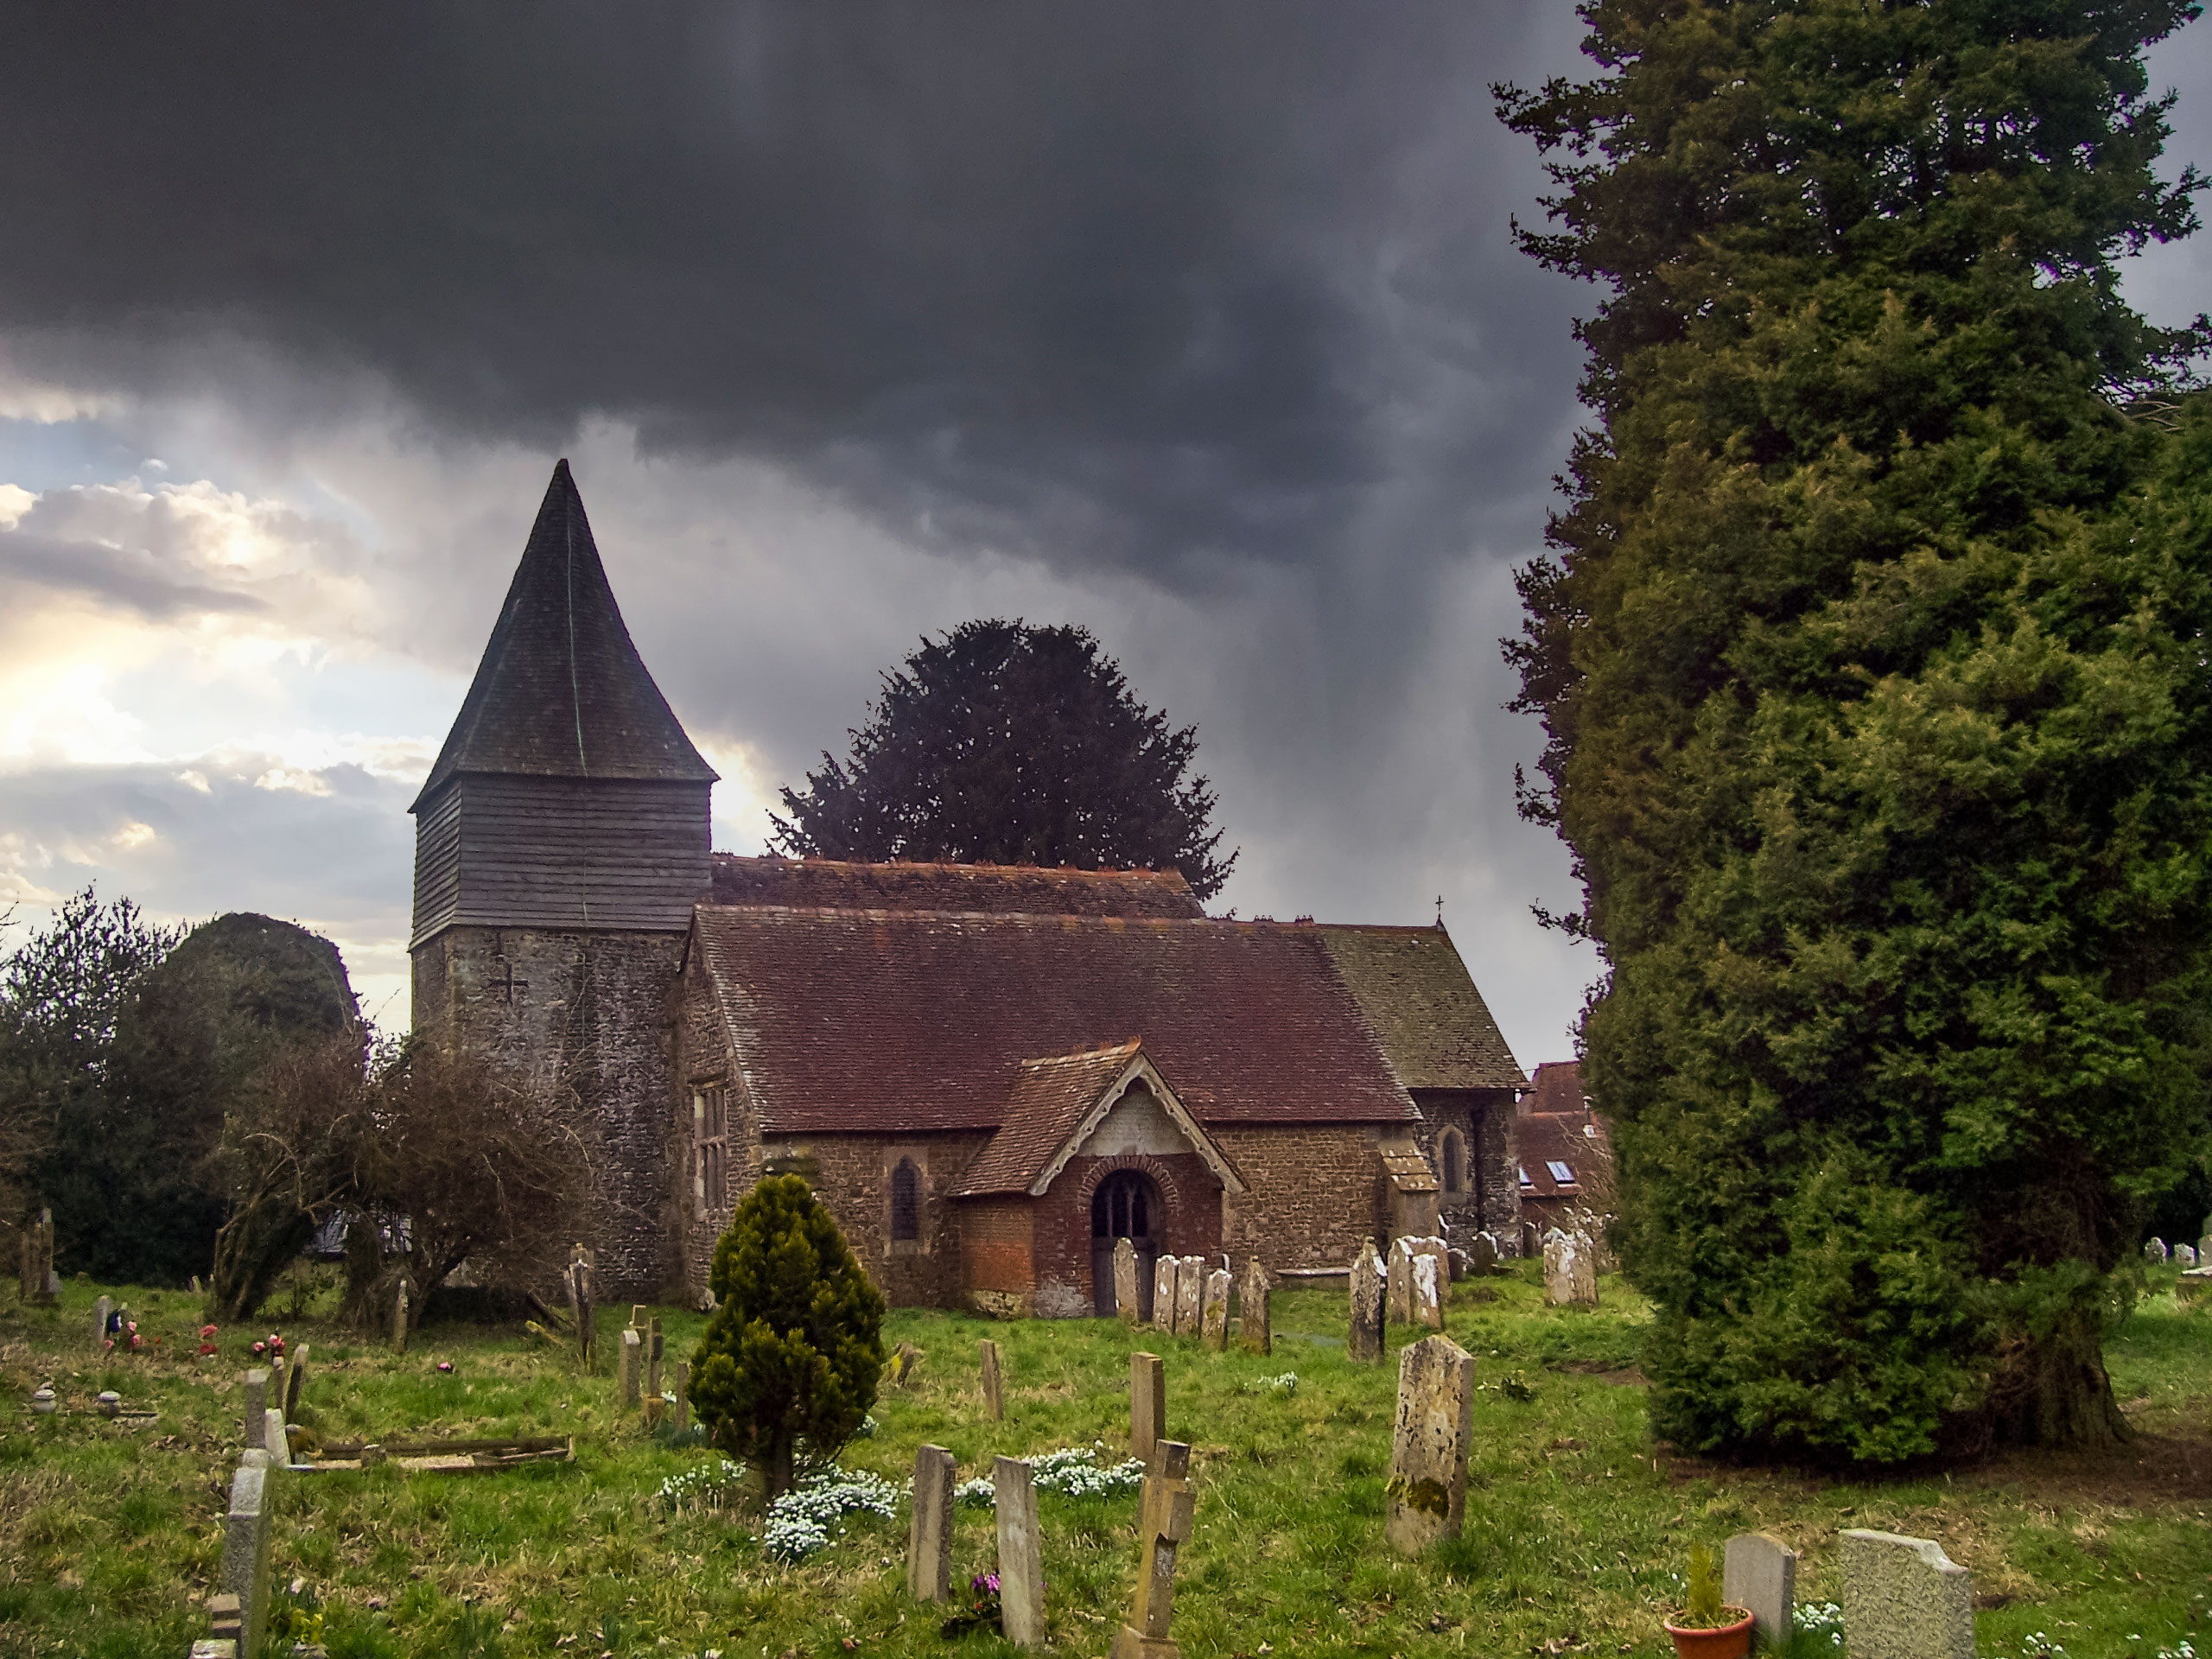 Storm clouds over old church graveyard walking Liss Hawkley and Steep walk in South Downs UK